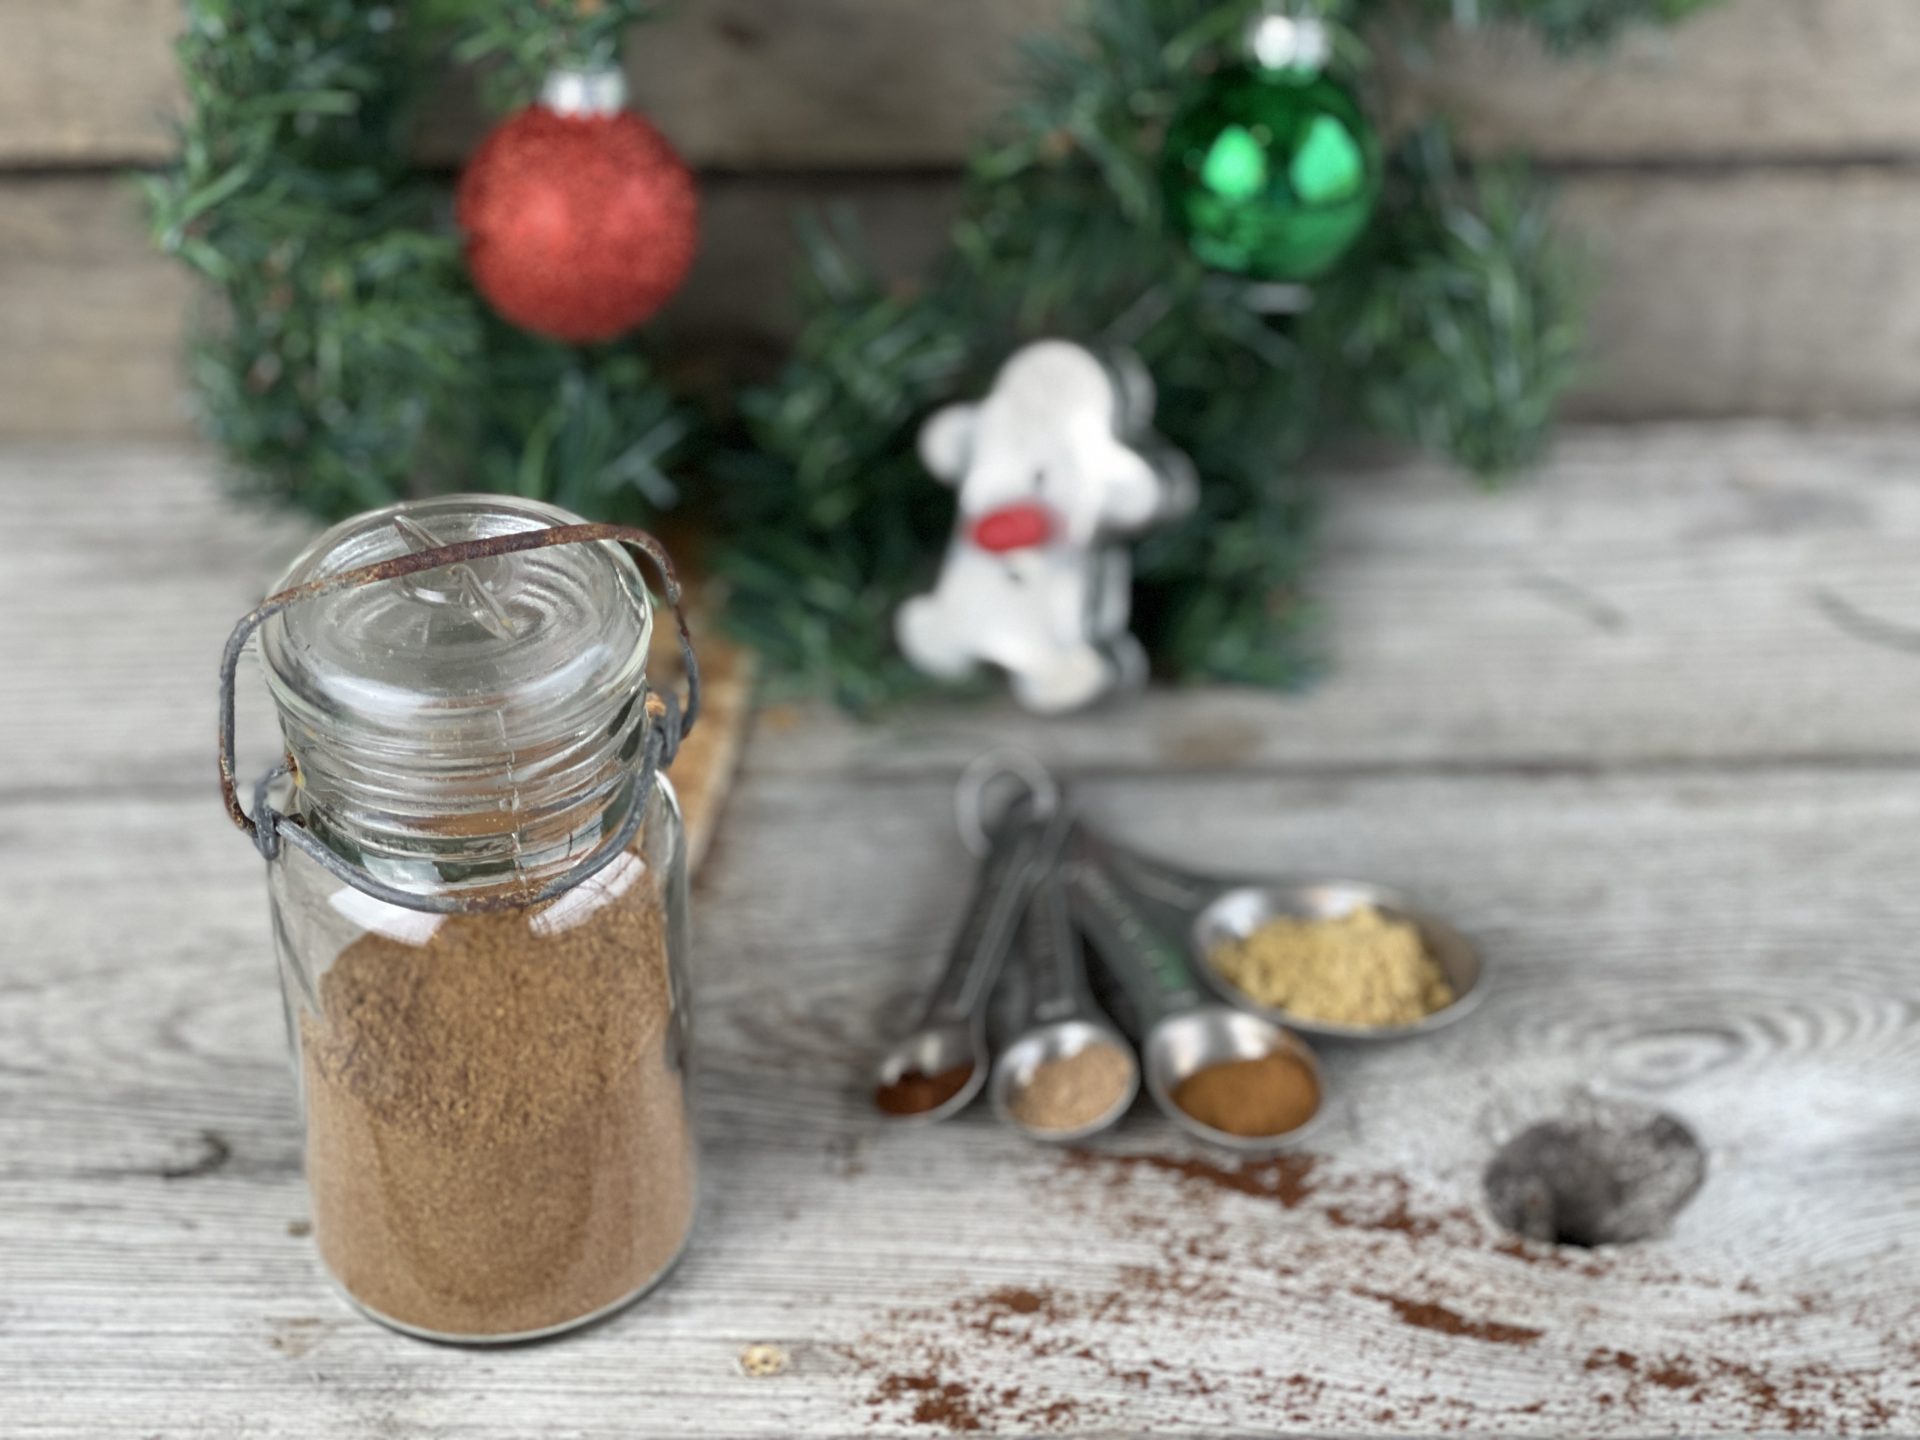 Homemade Gingerbread Spice Mix from Farmwife Feeds is a holiday must, a mix of 5 common spices for that Christmas holiday favorite! #spicemix #gingerbread